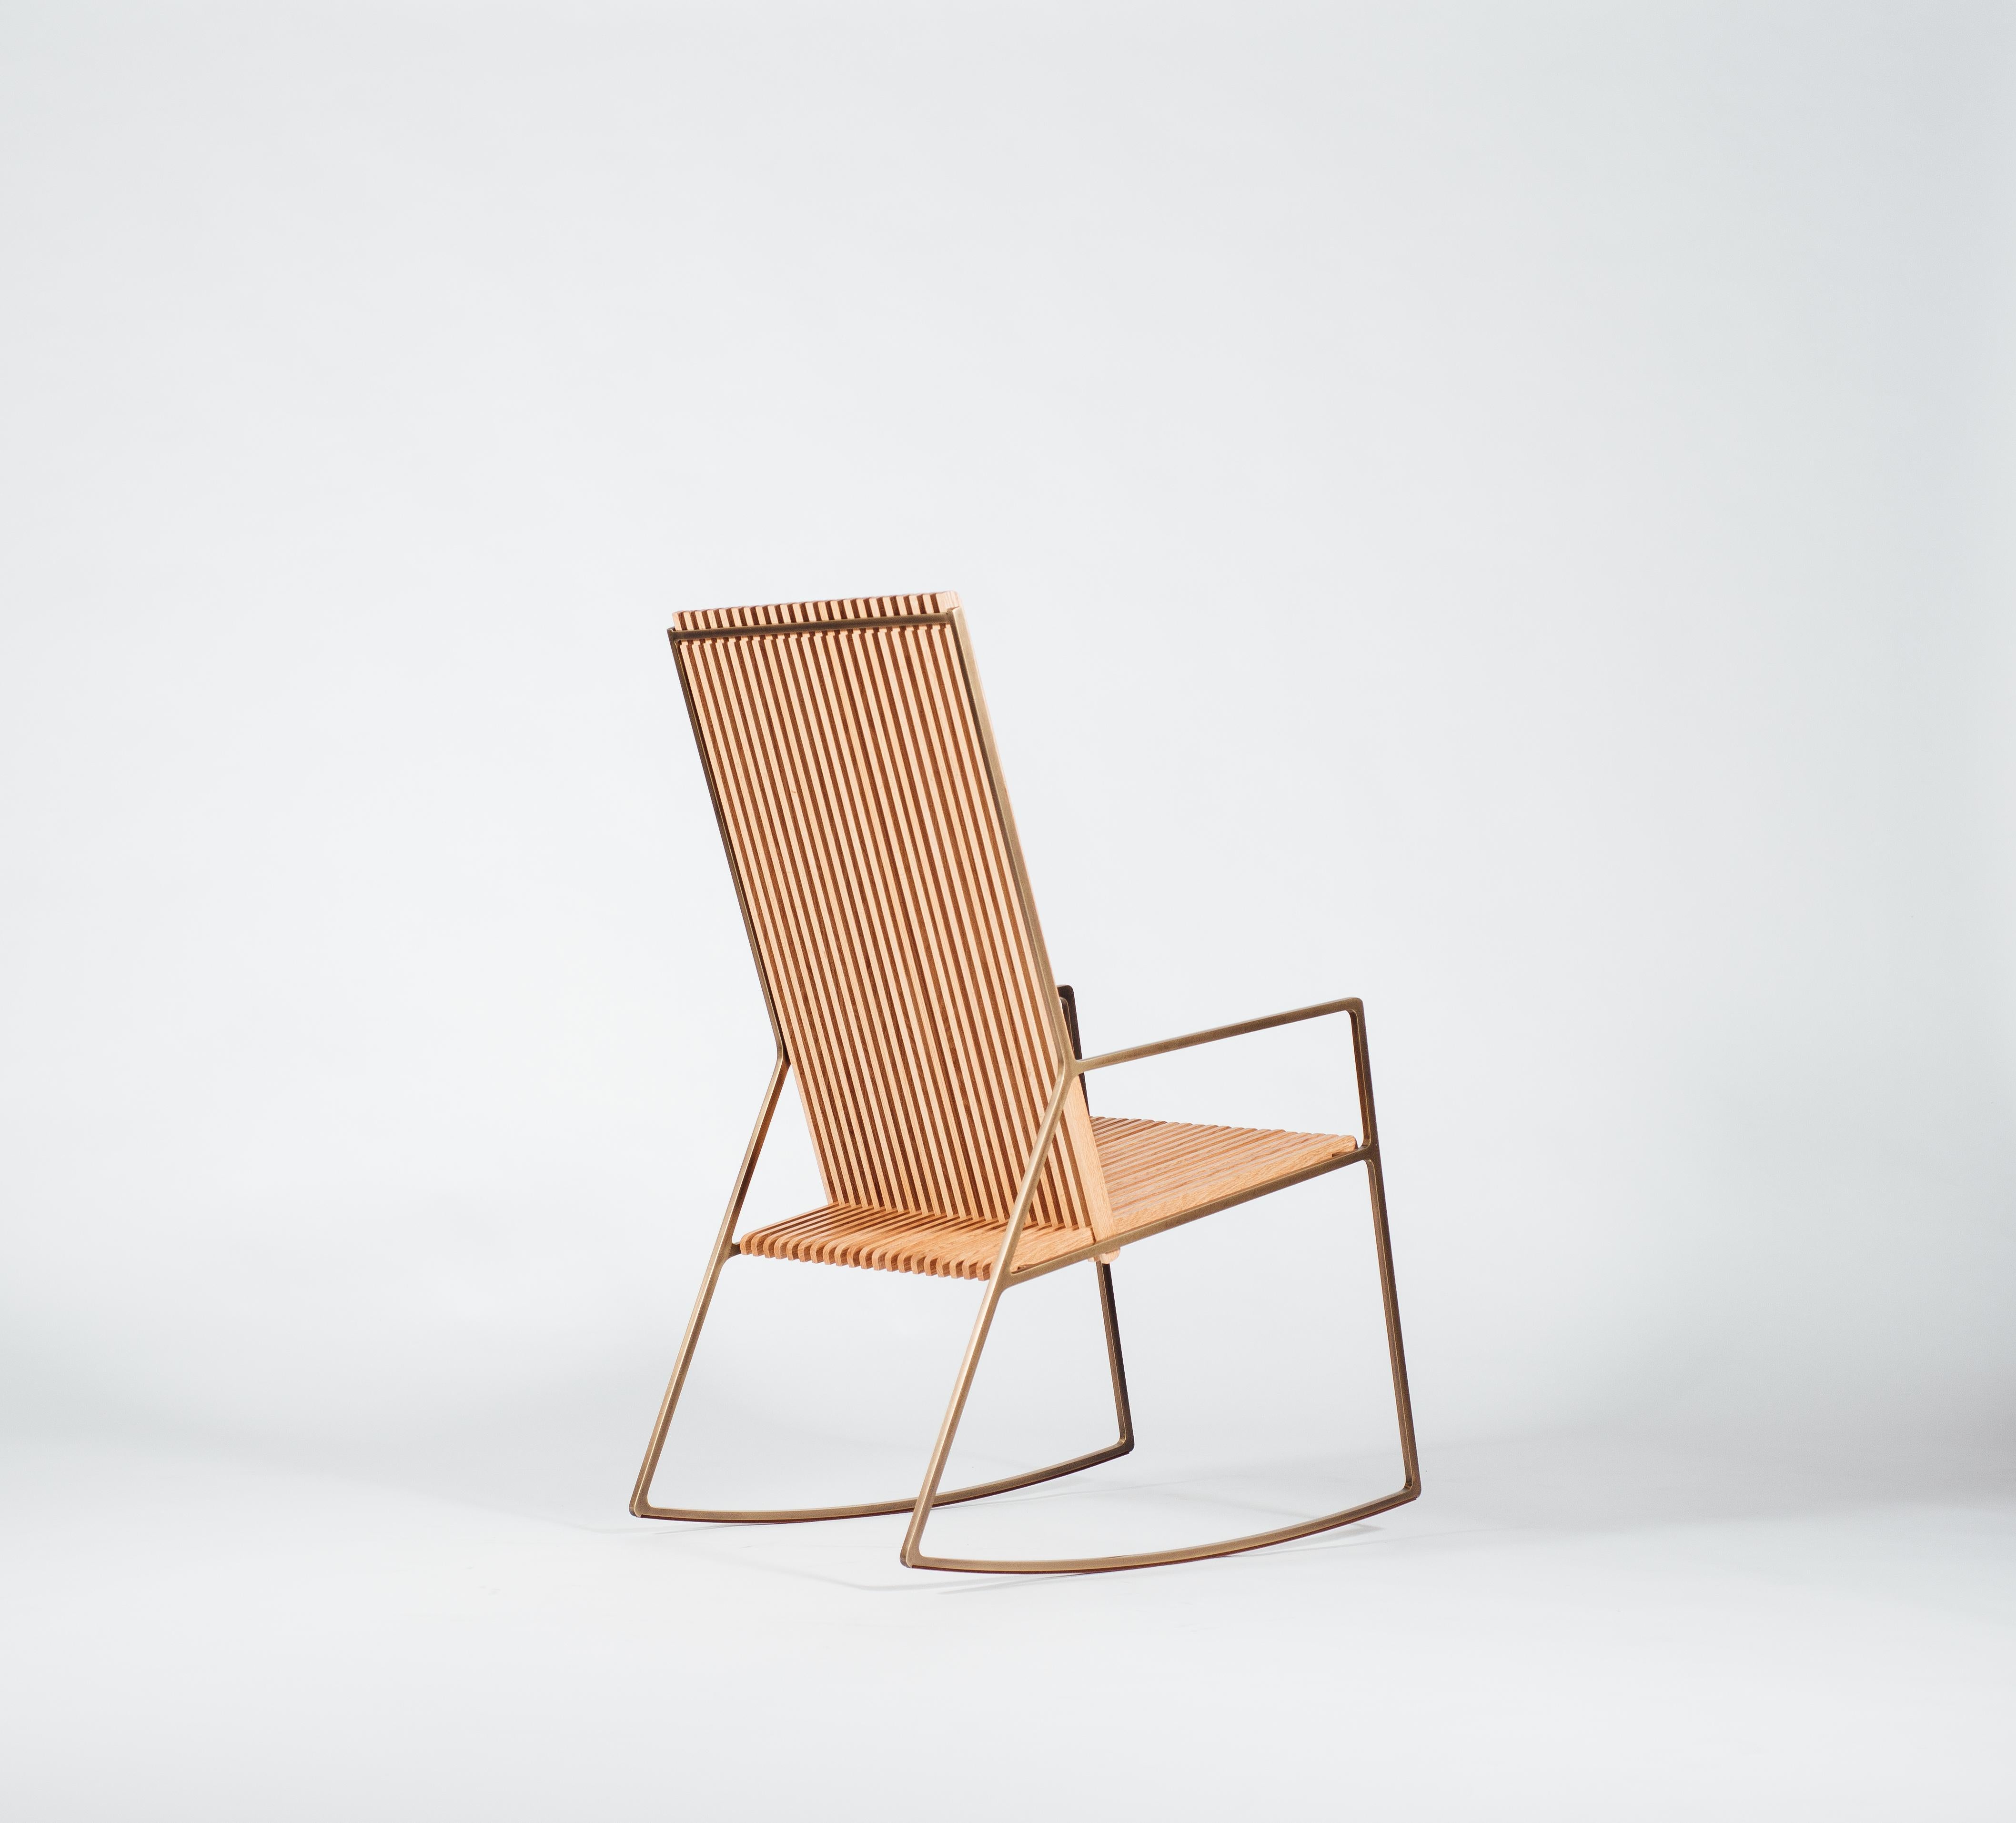 Iced tea in hand, Sam Cooke on the HiFi, the rocker tall is deeply rooted in Southern American porch culture. While its heritage might be southern, this contemporary Rocker by Klein Agency finds its minimal elegance in its lengthy back and slender